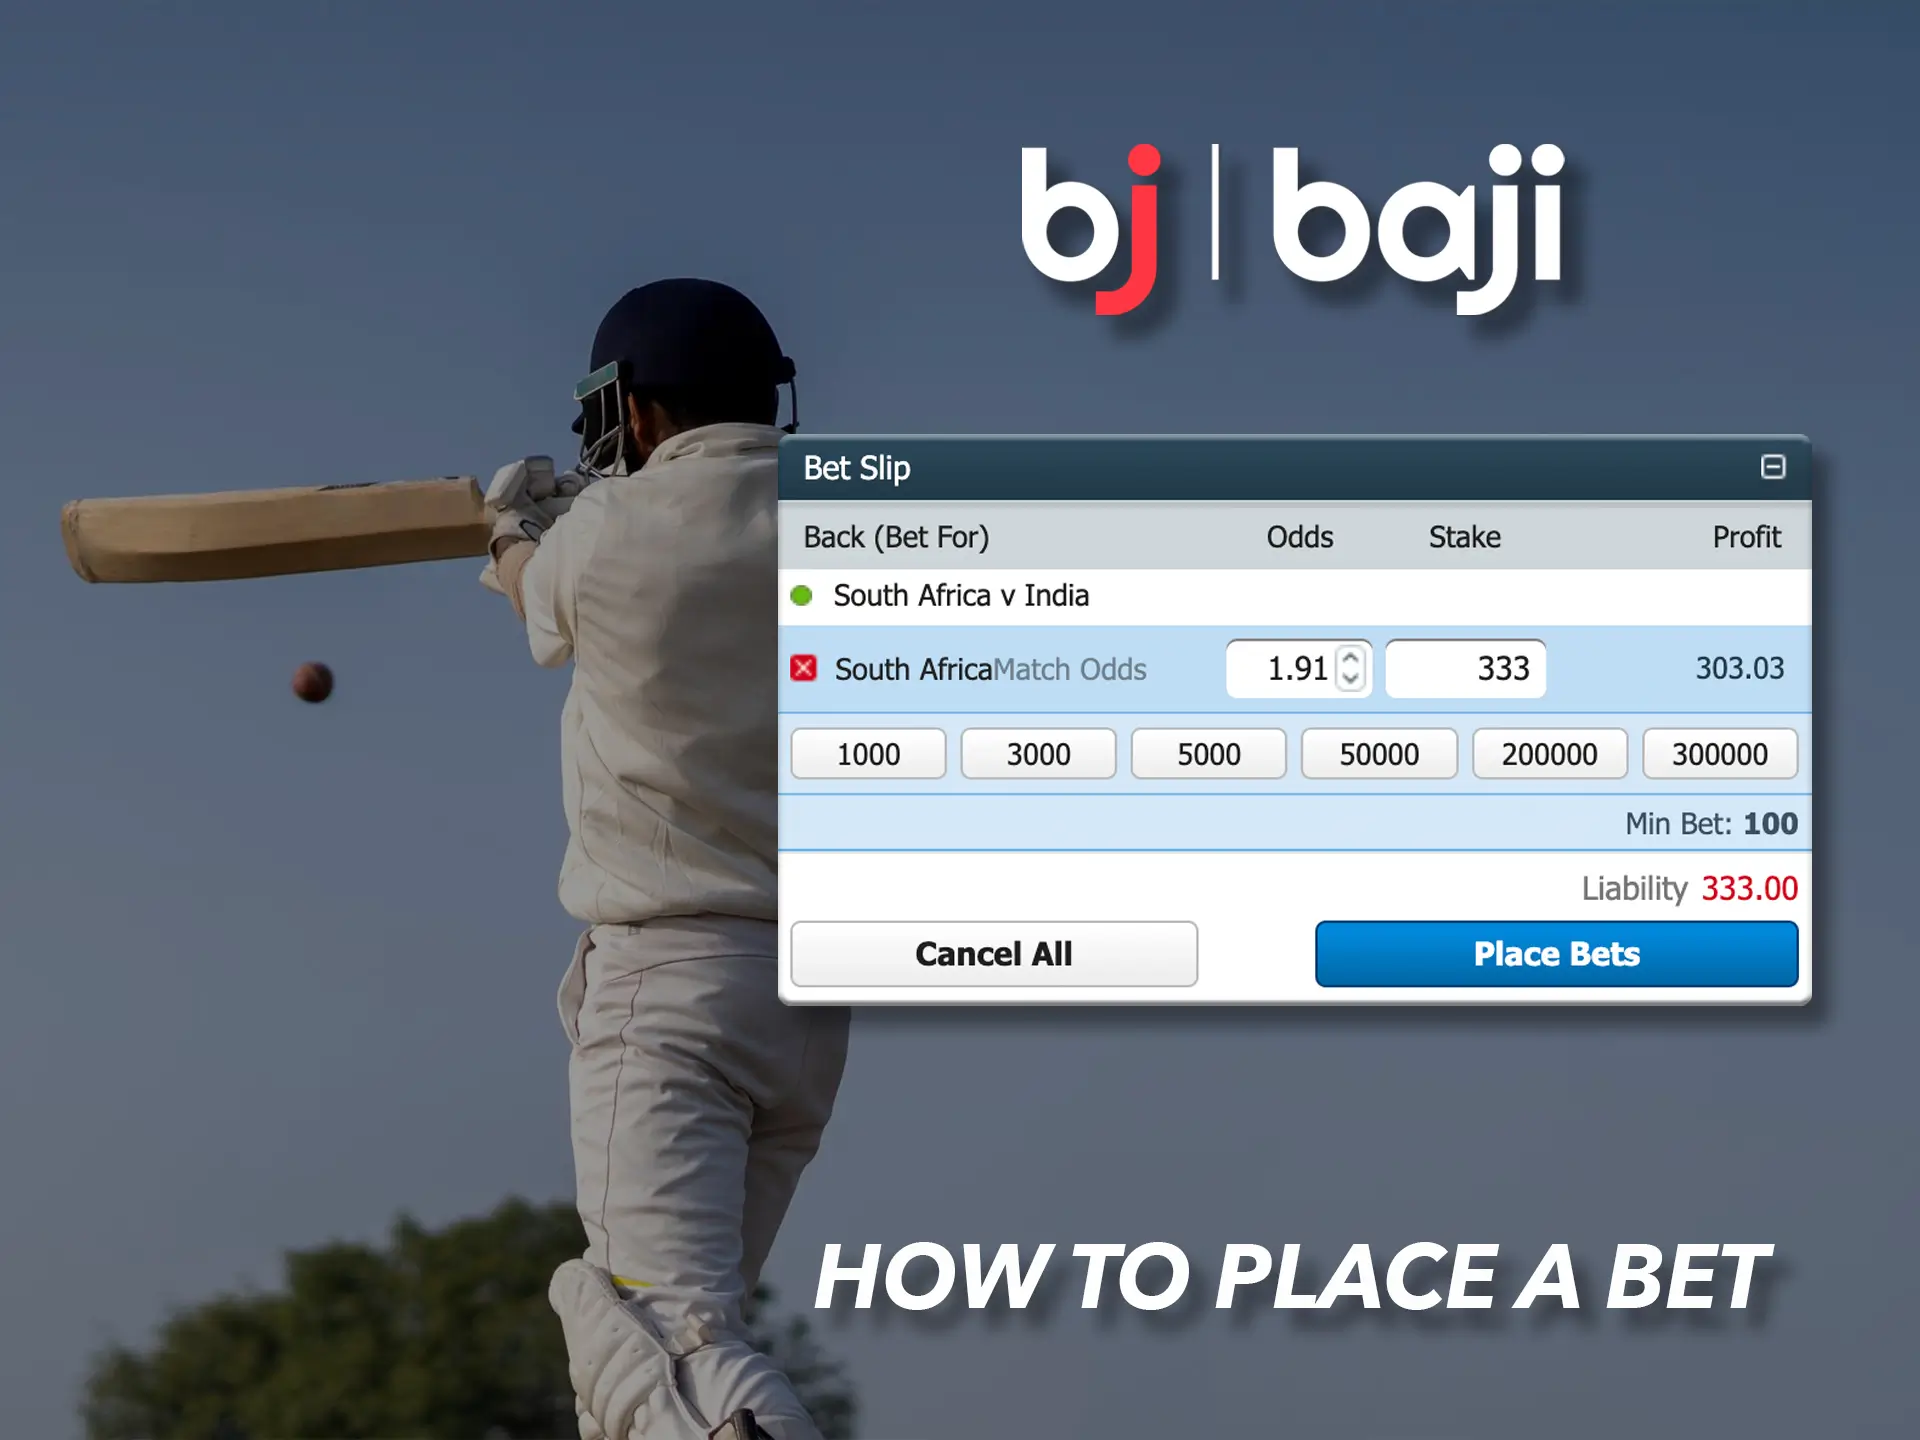 Go to the sports section and place your first bet at Baji.